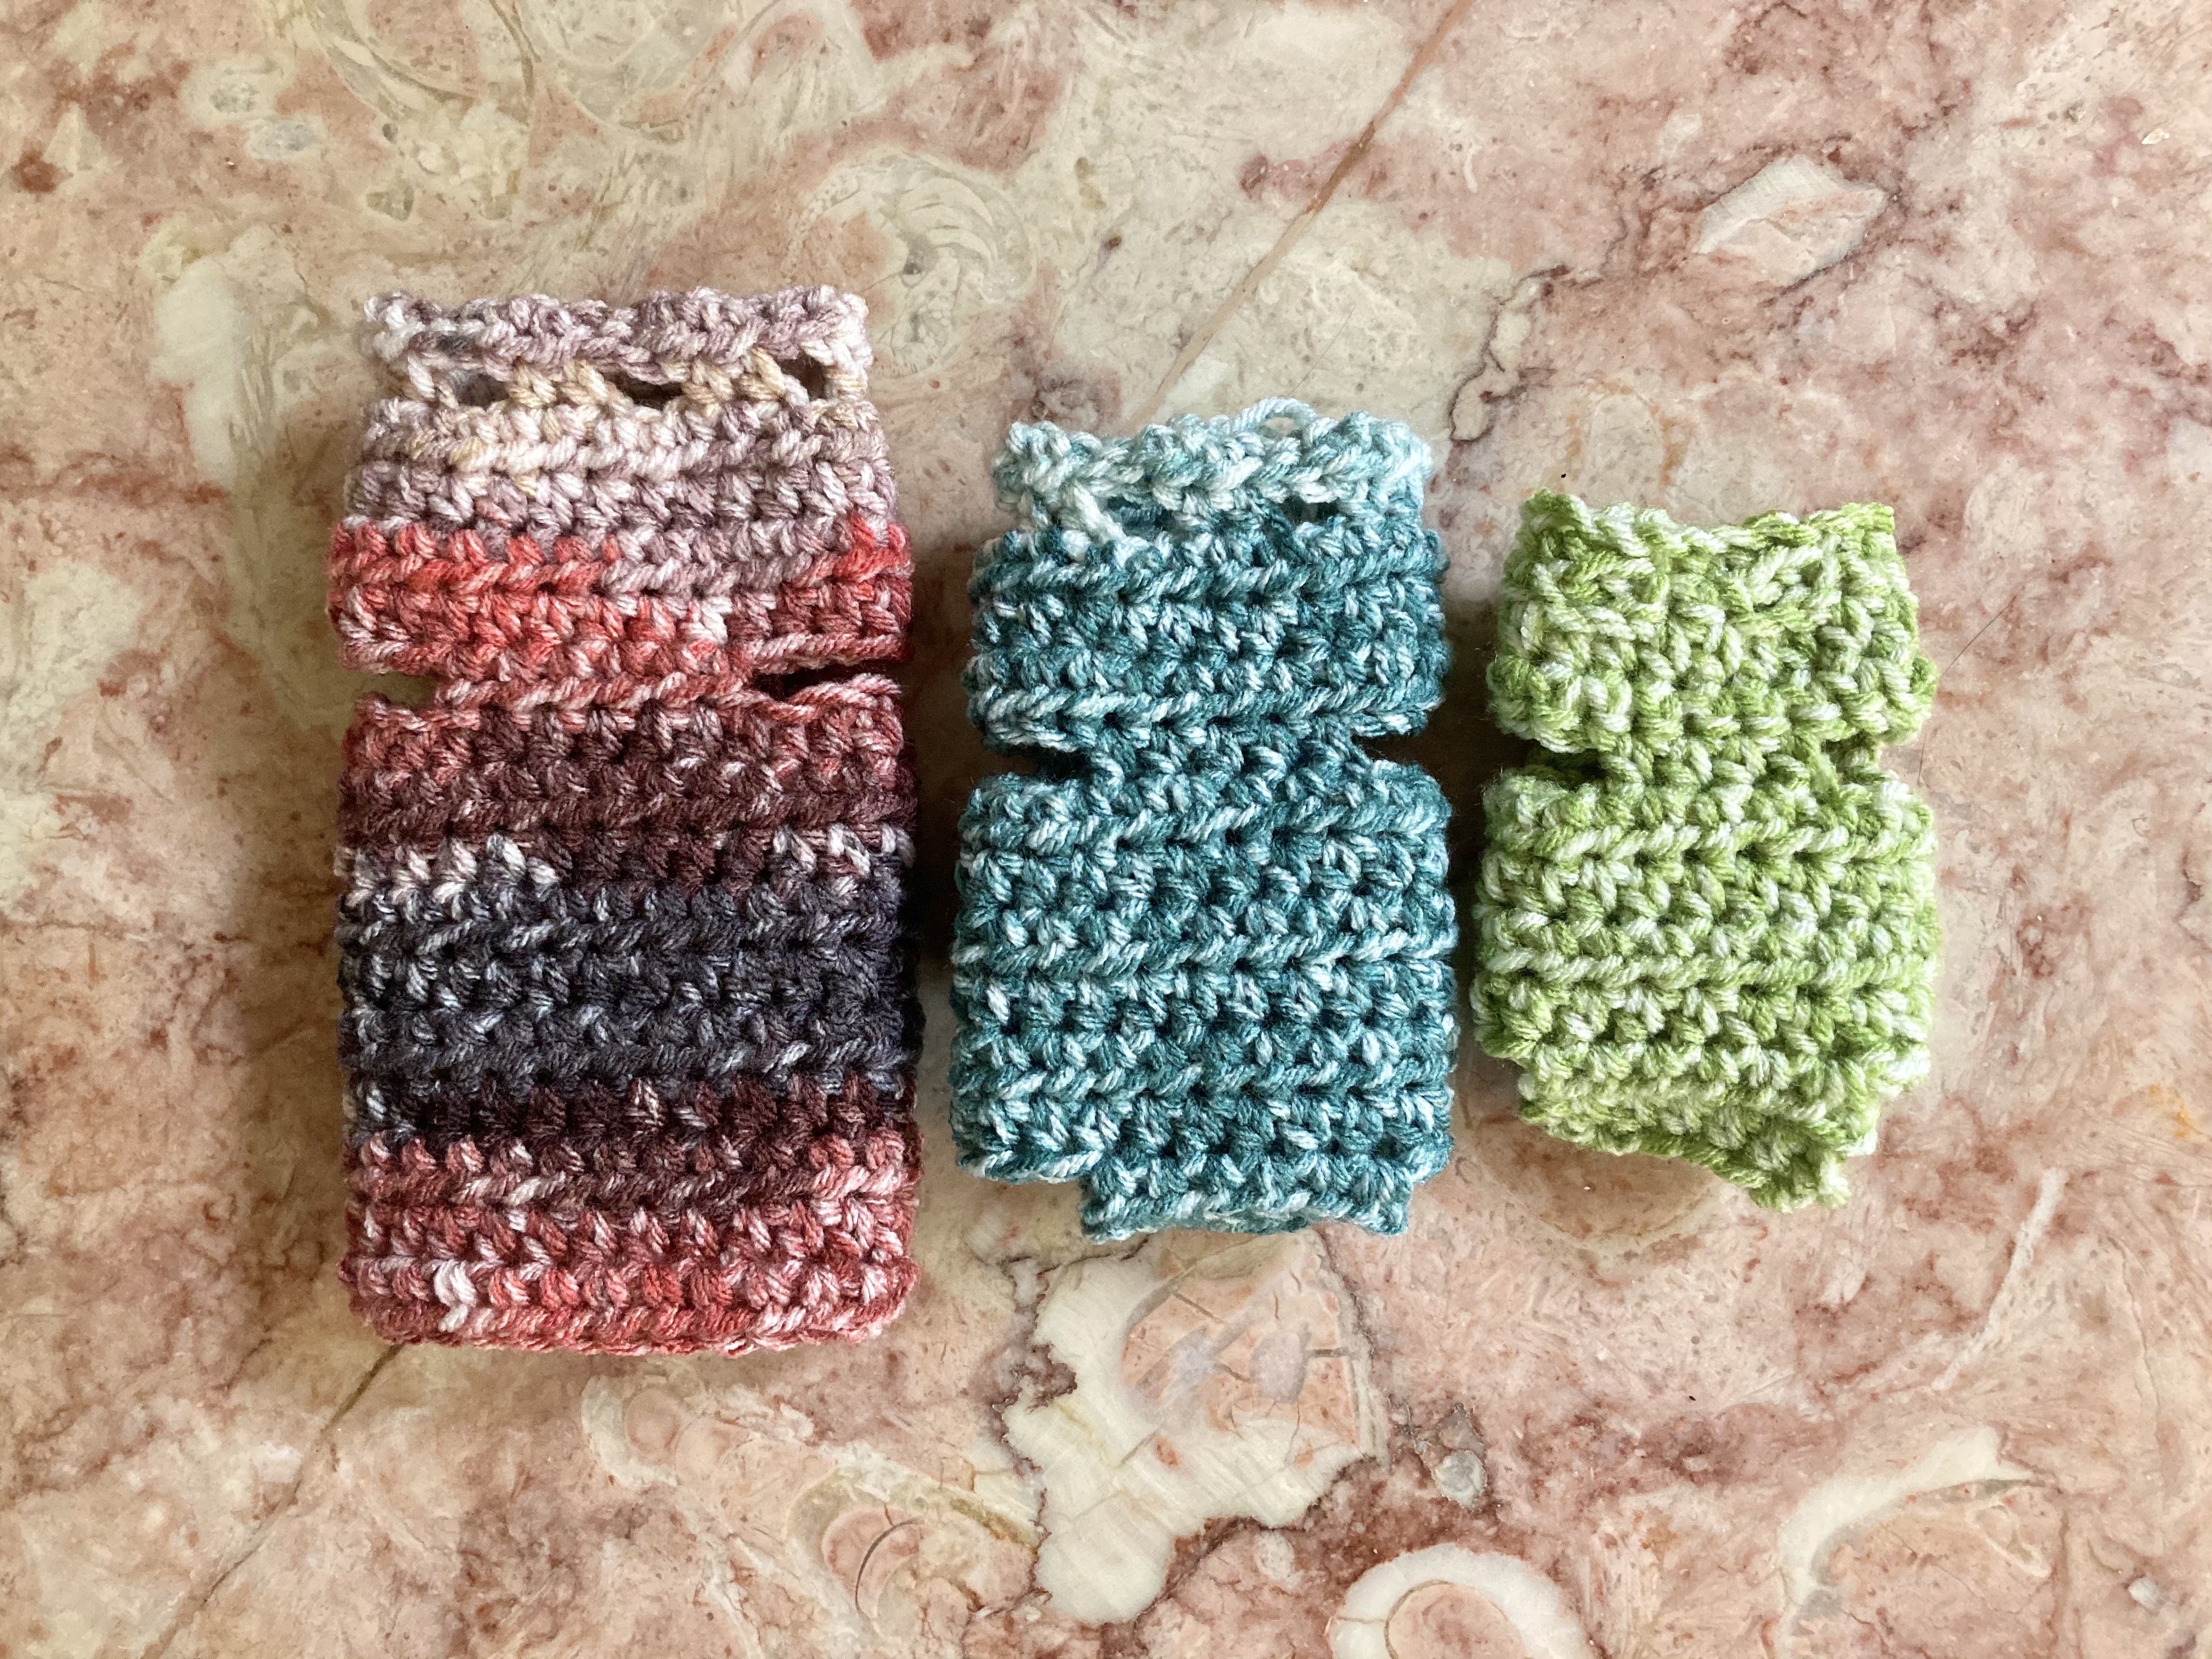 three stacks of small knitted kitten sweaters in large, medium, and small sizes